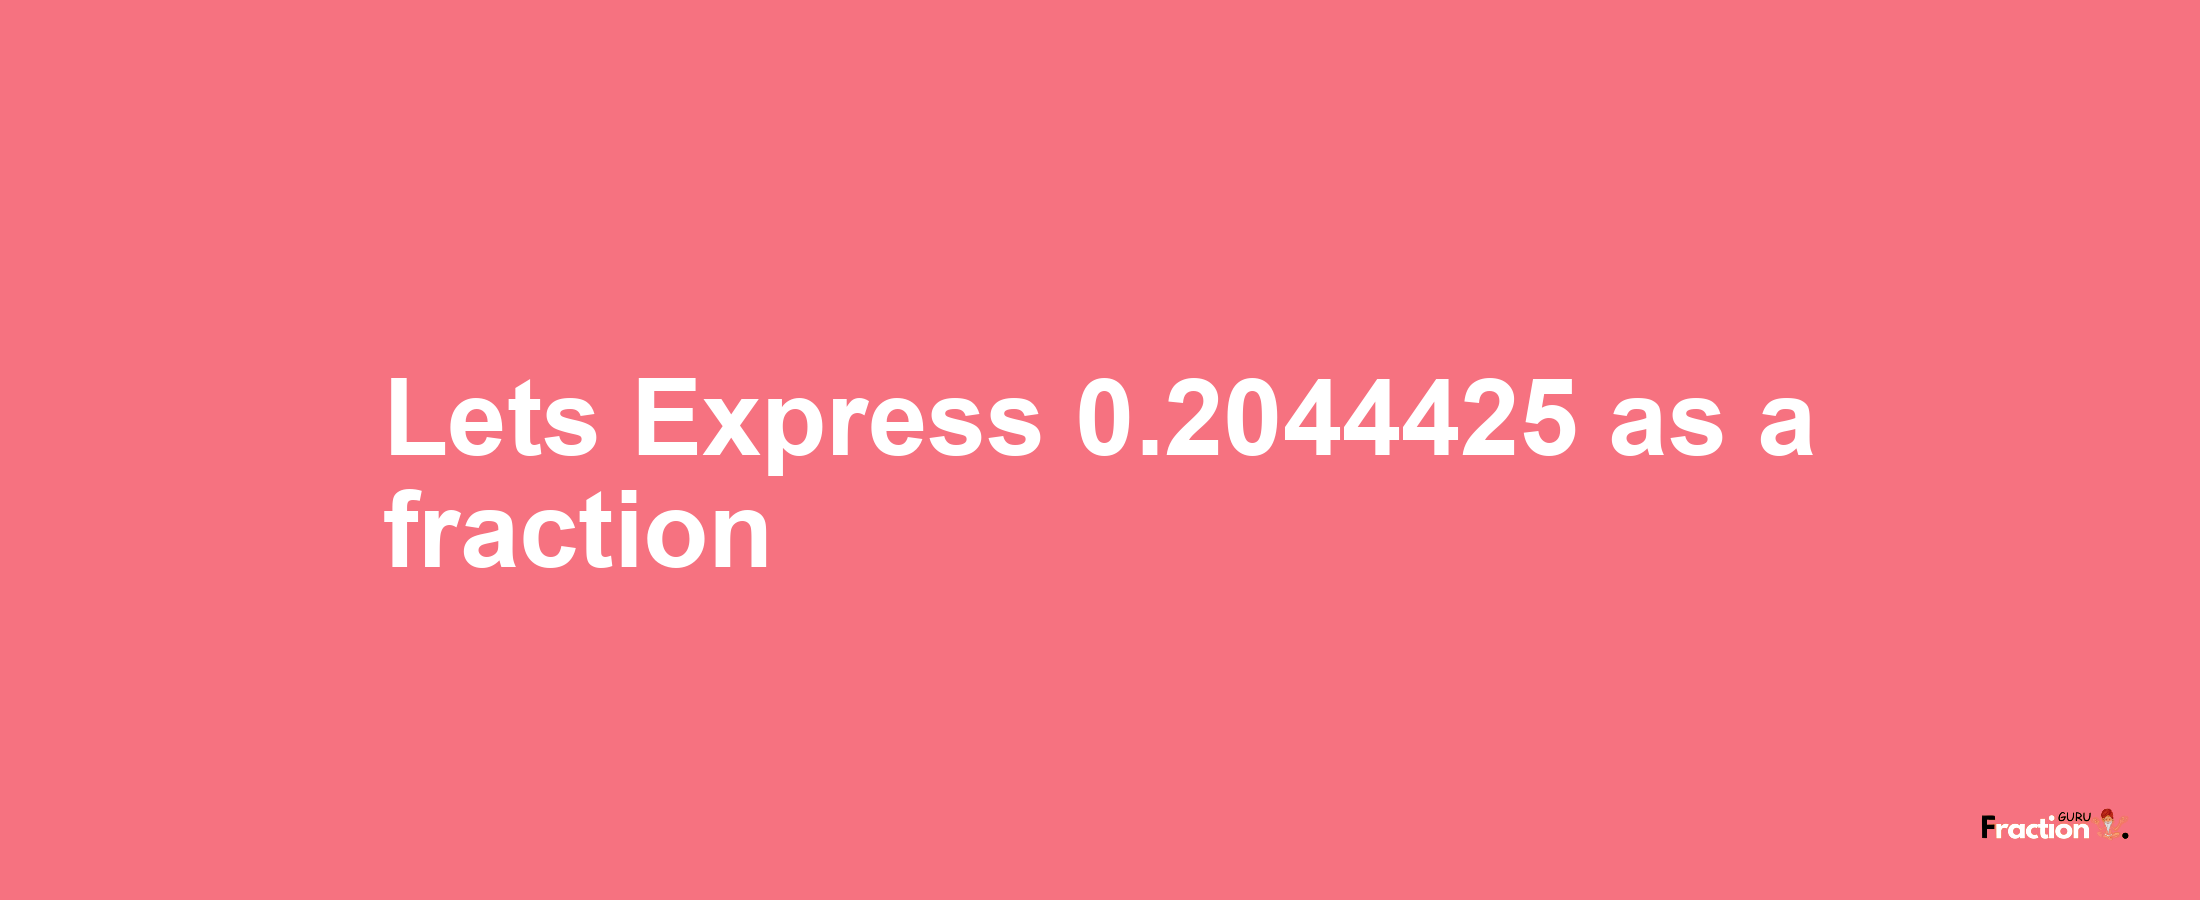 Lets Express 0.2044425 as afraction